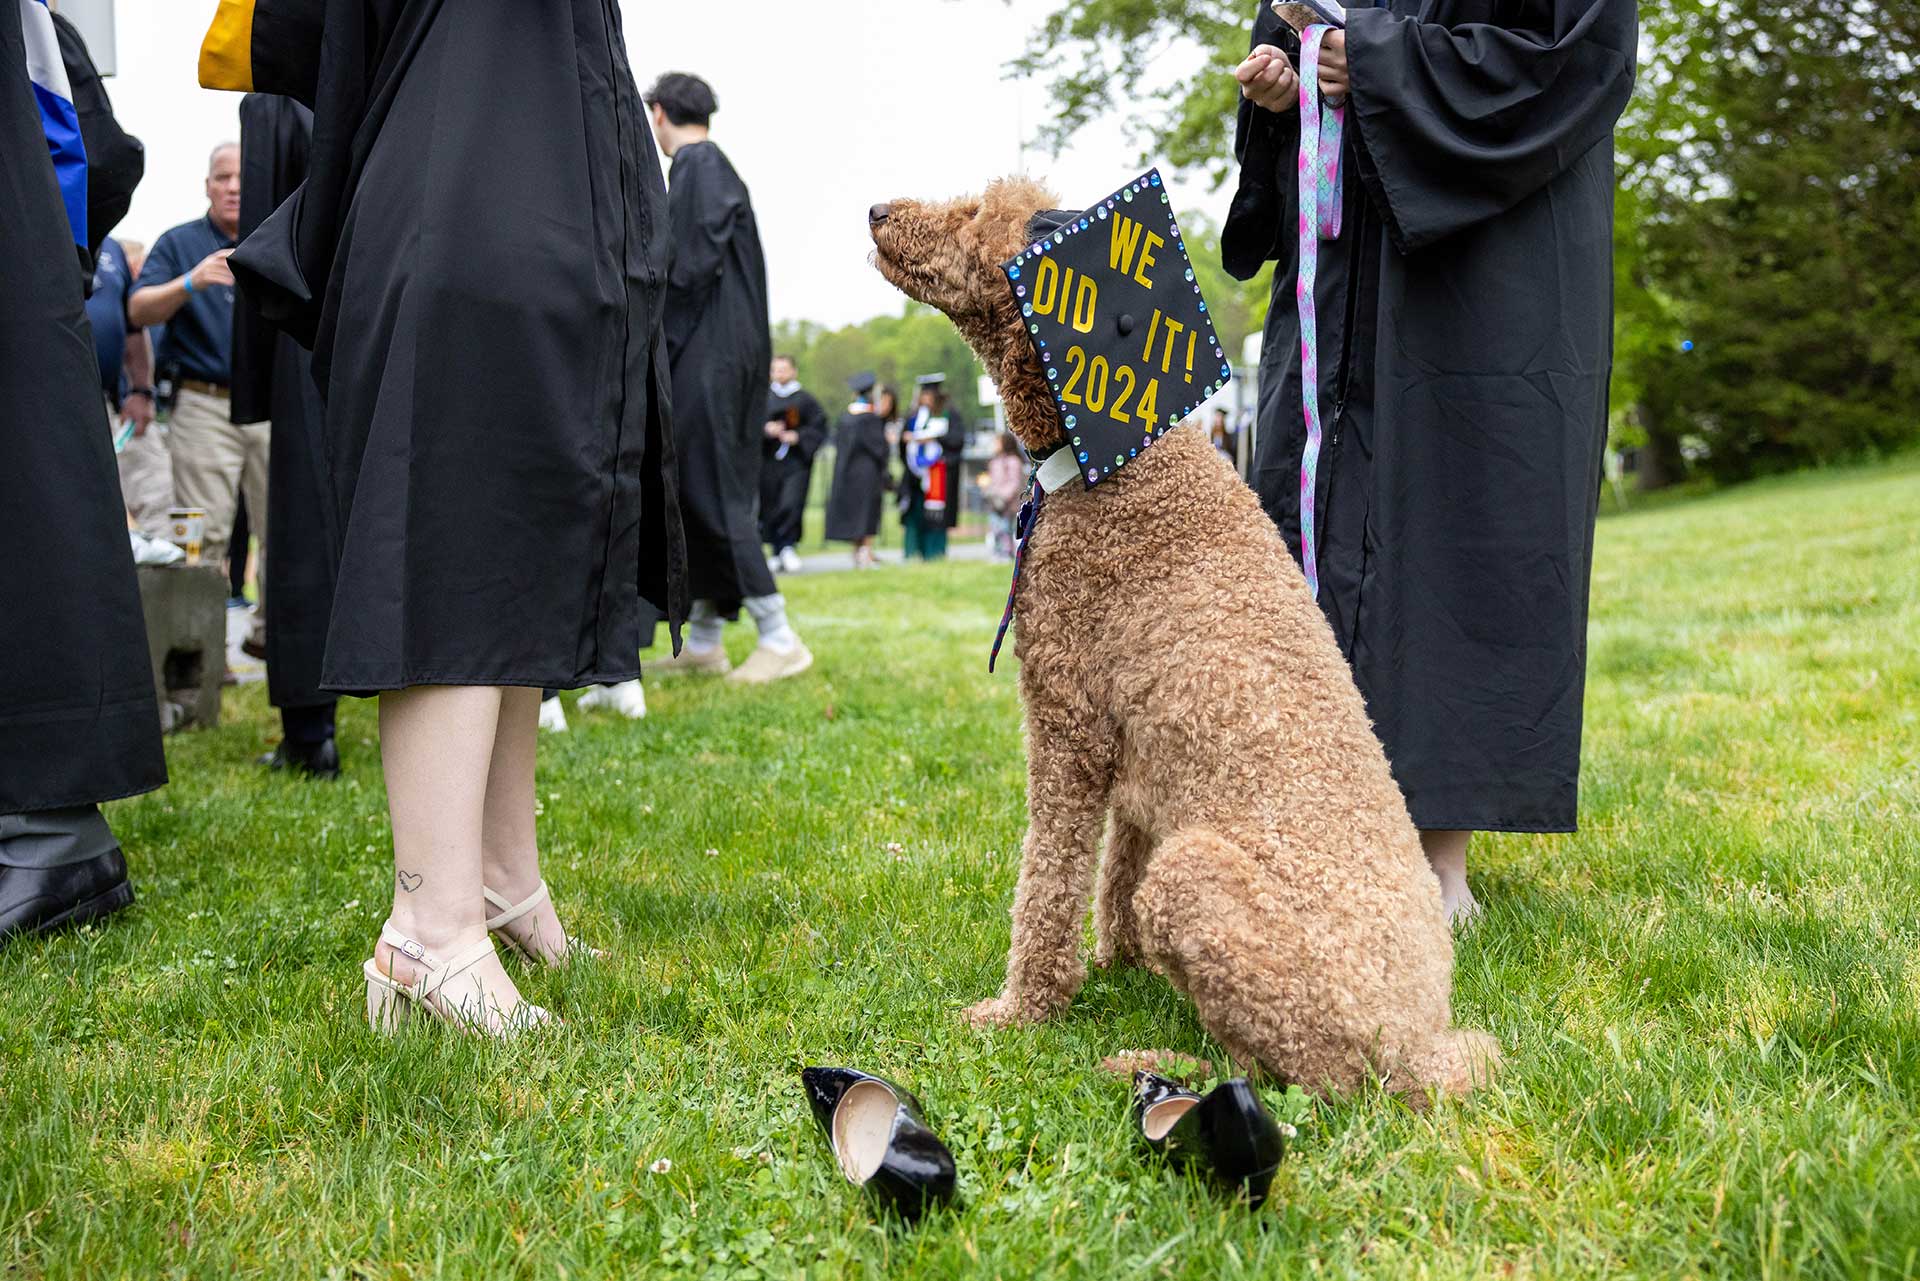 A dog wearing a graduation cap with the words We Did it 2024